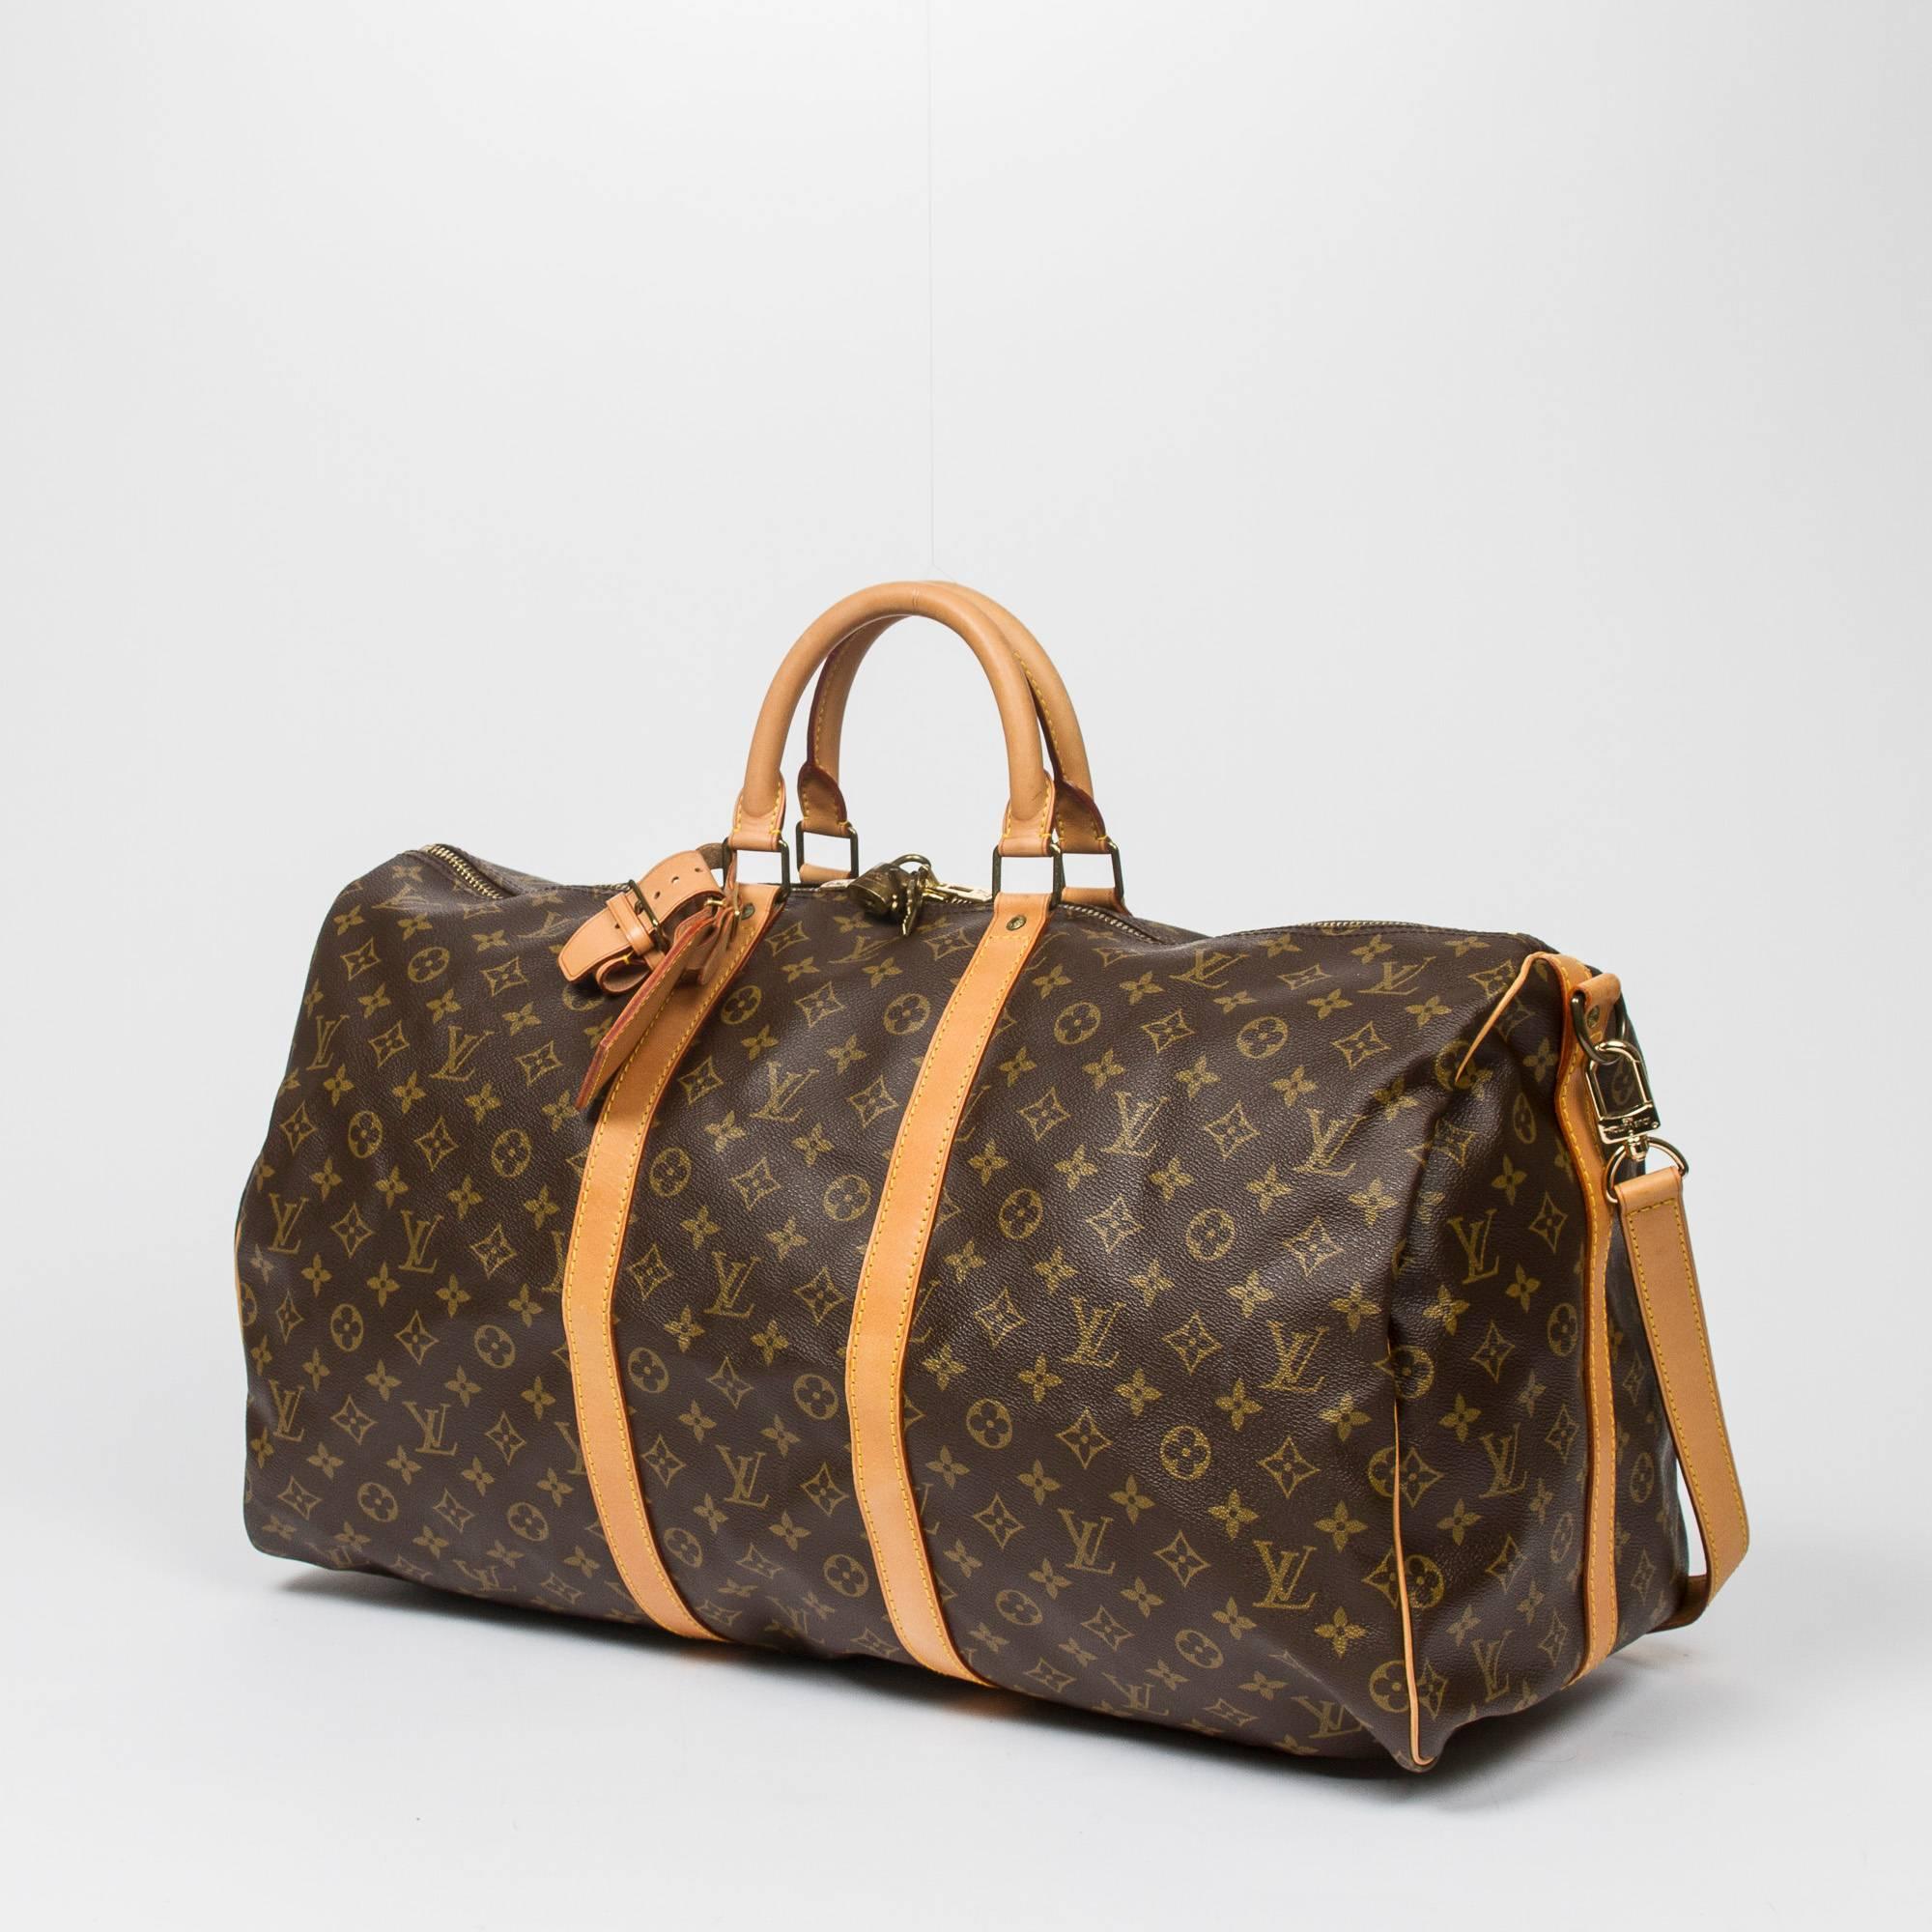 Keepall Bandouliere 55 in monogram canvas, vachetta leather shoulder strap handles and trimmings. Golden brass hardware. Double zipper closure. Brown canvas lining. Luggage tag, handle strap, cadenas and keys included. Date code VI0930. Model from